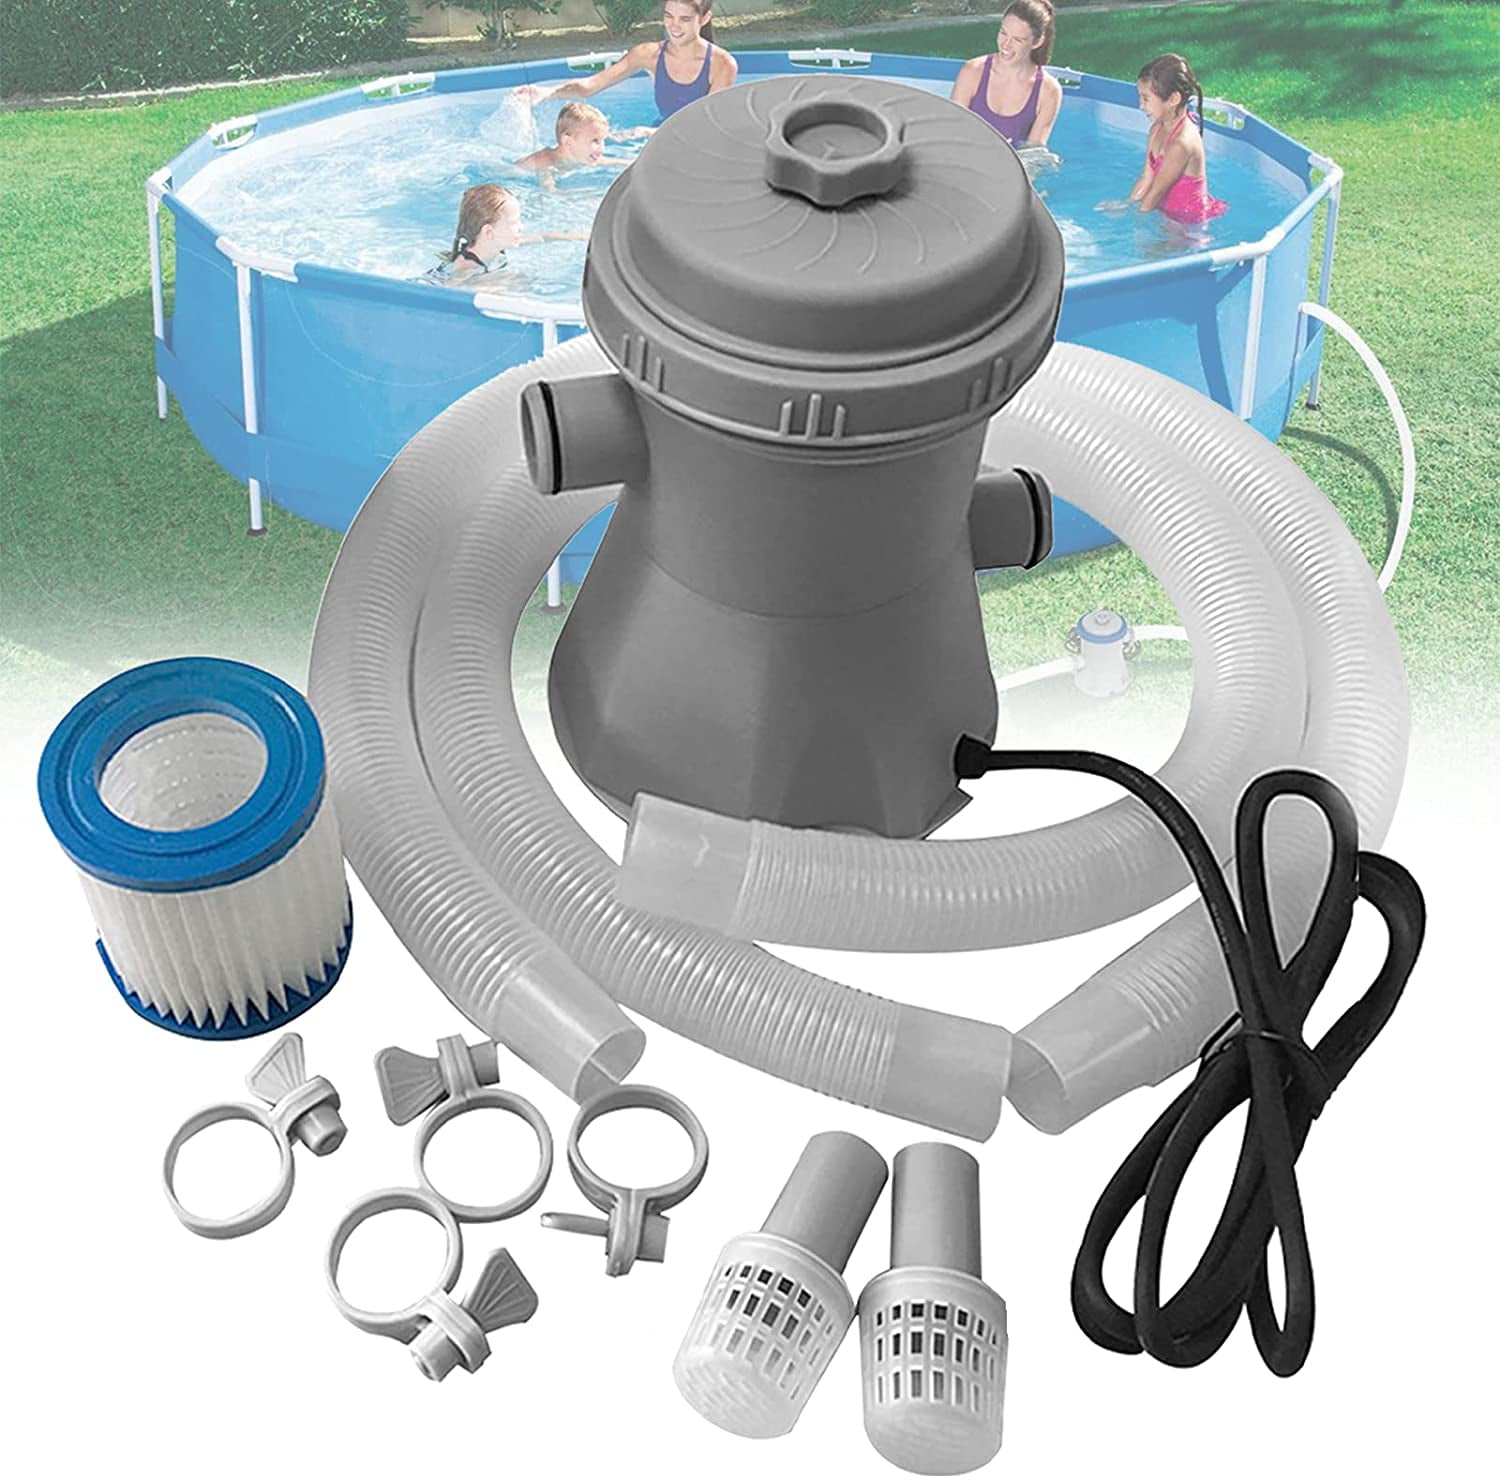 snow keychain Swimming Pool Filter Pump,with Clear Cartridge Filter Pump,with 300 gallons Pump Flow Rate,Can be Used in Gardens,Above-Ground Swimming Pools 